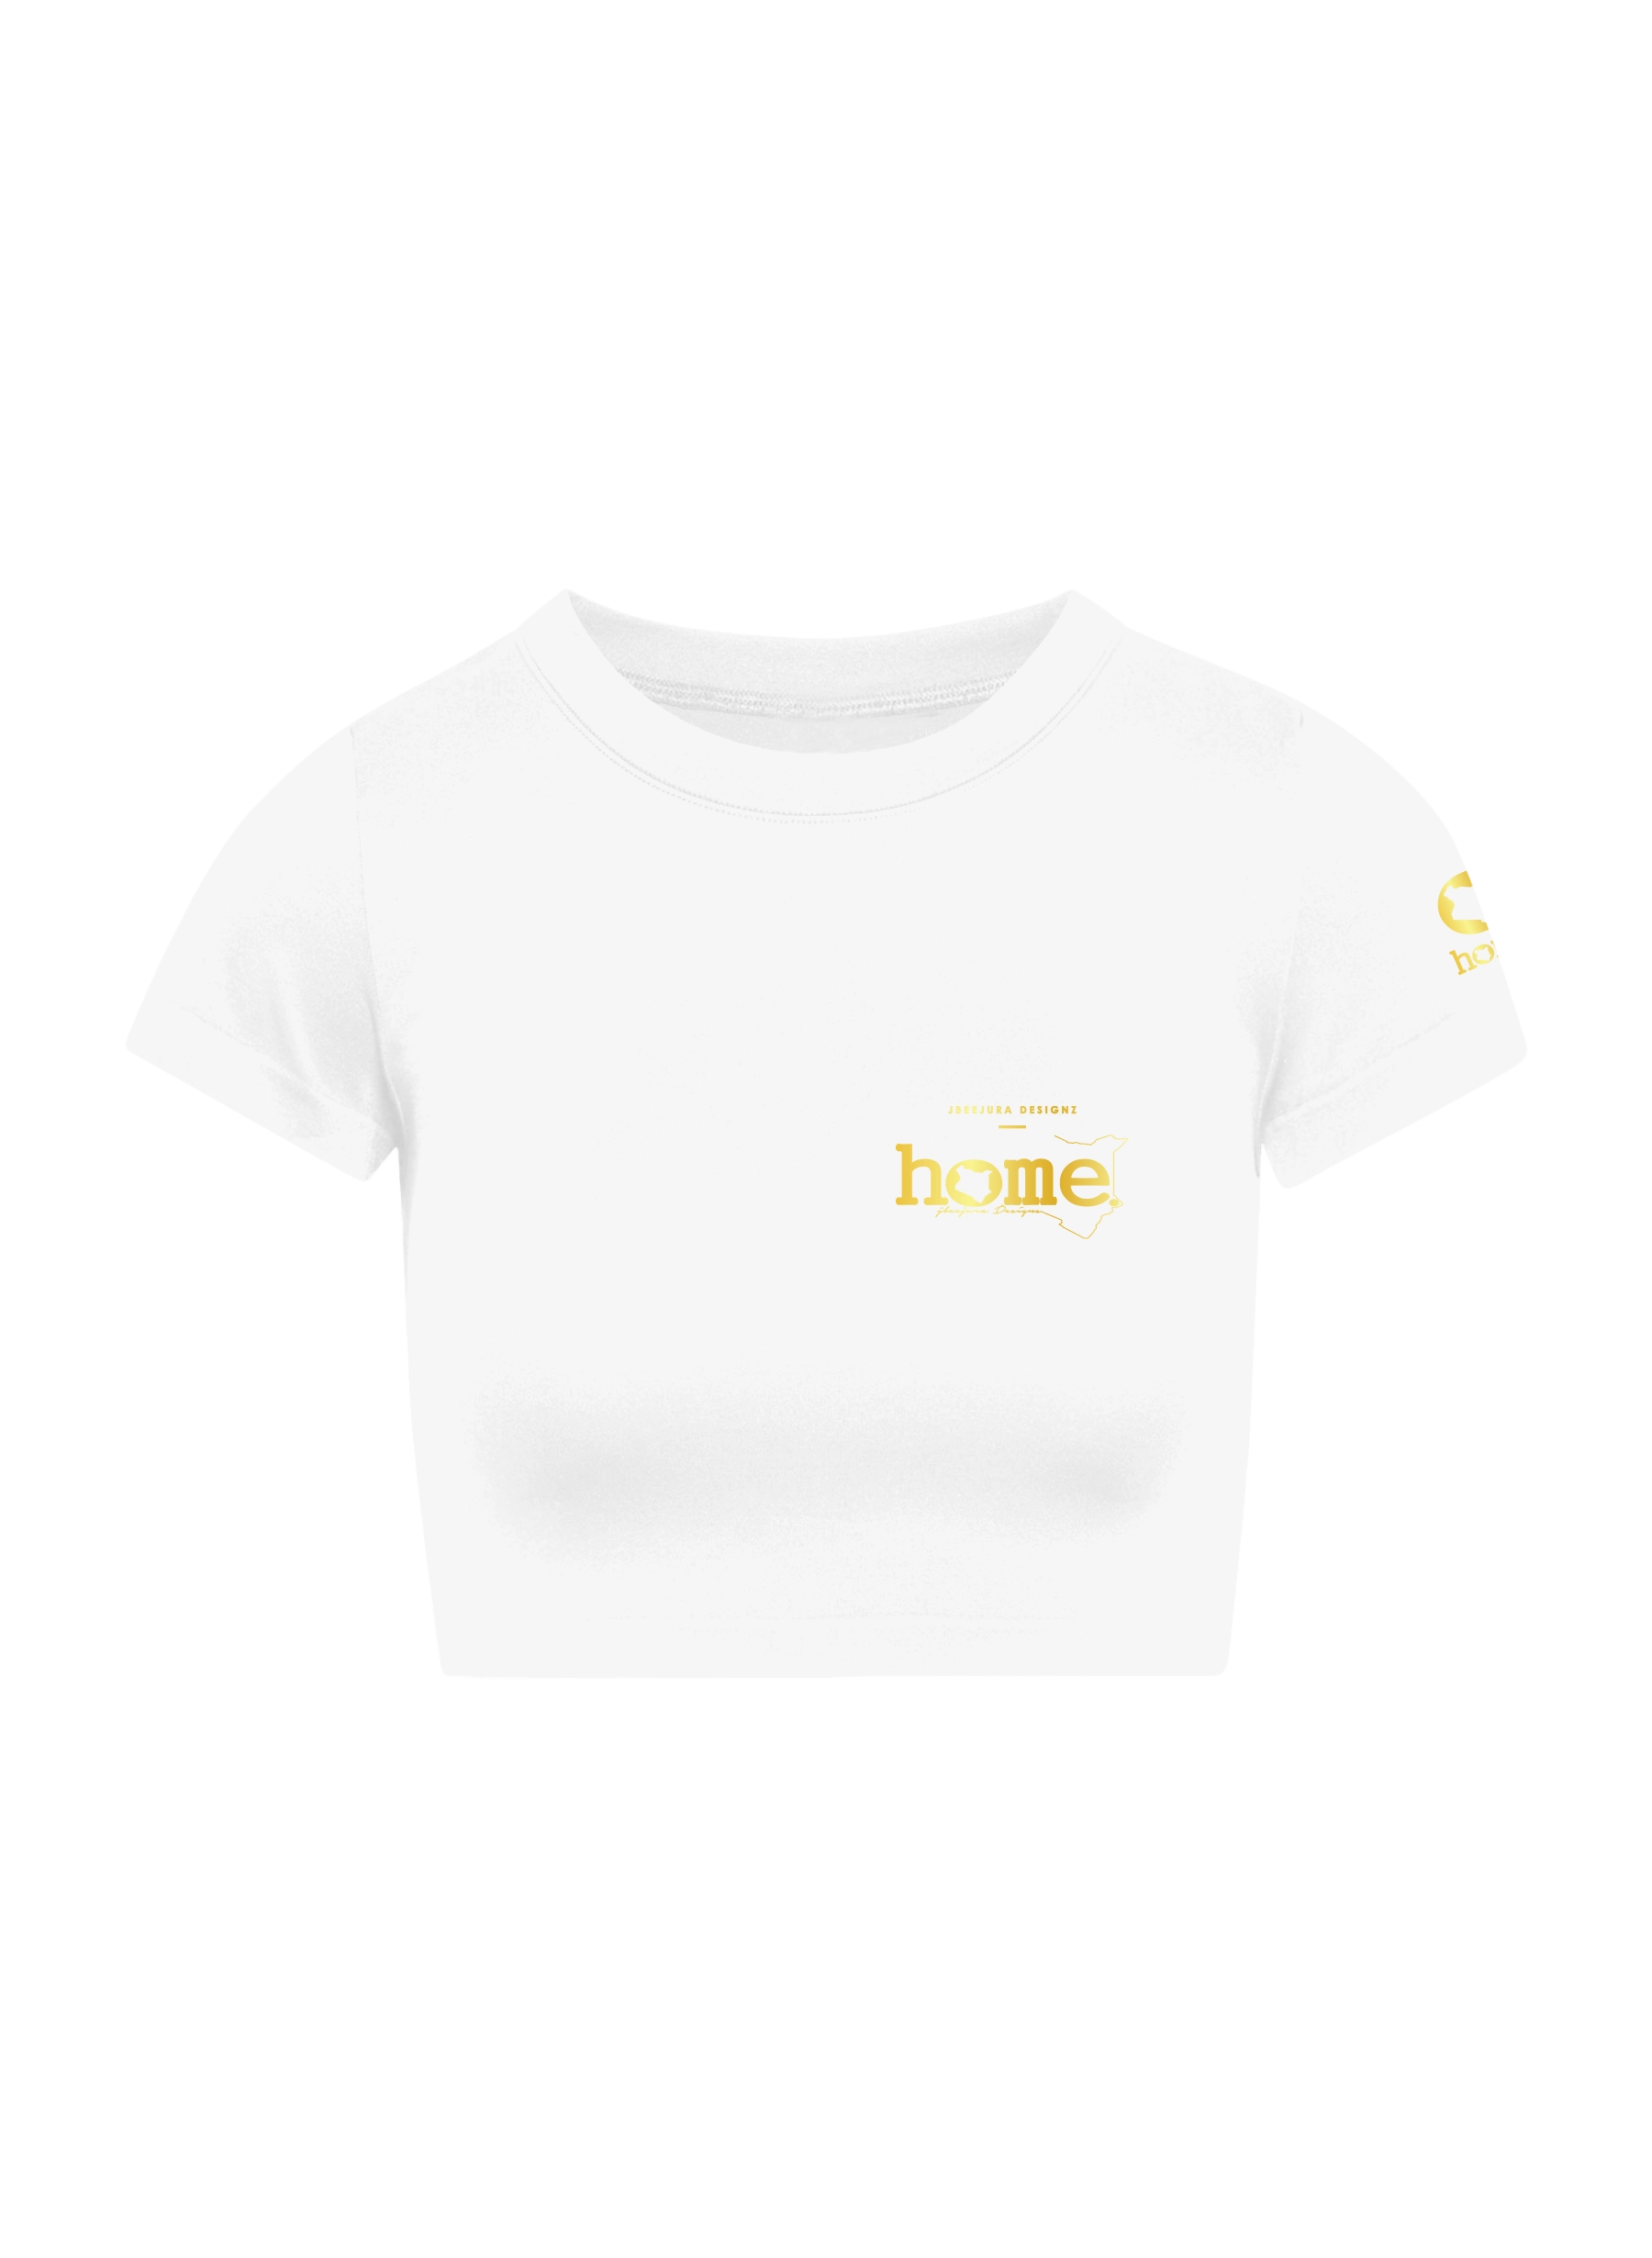 home_254 SHORT SLEEVED WHITE CROPPED ARIA TEE WITH A GOLD 3D WORDS PRINT 